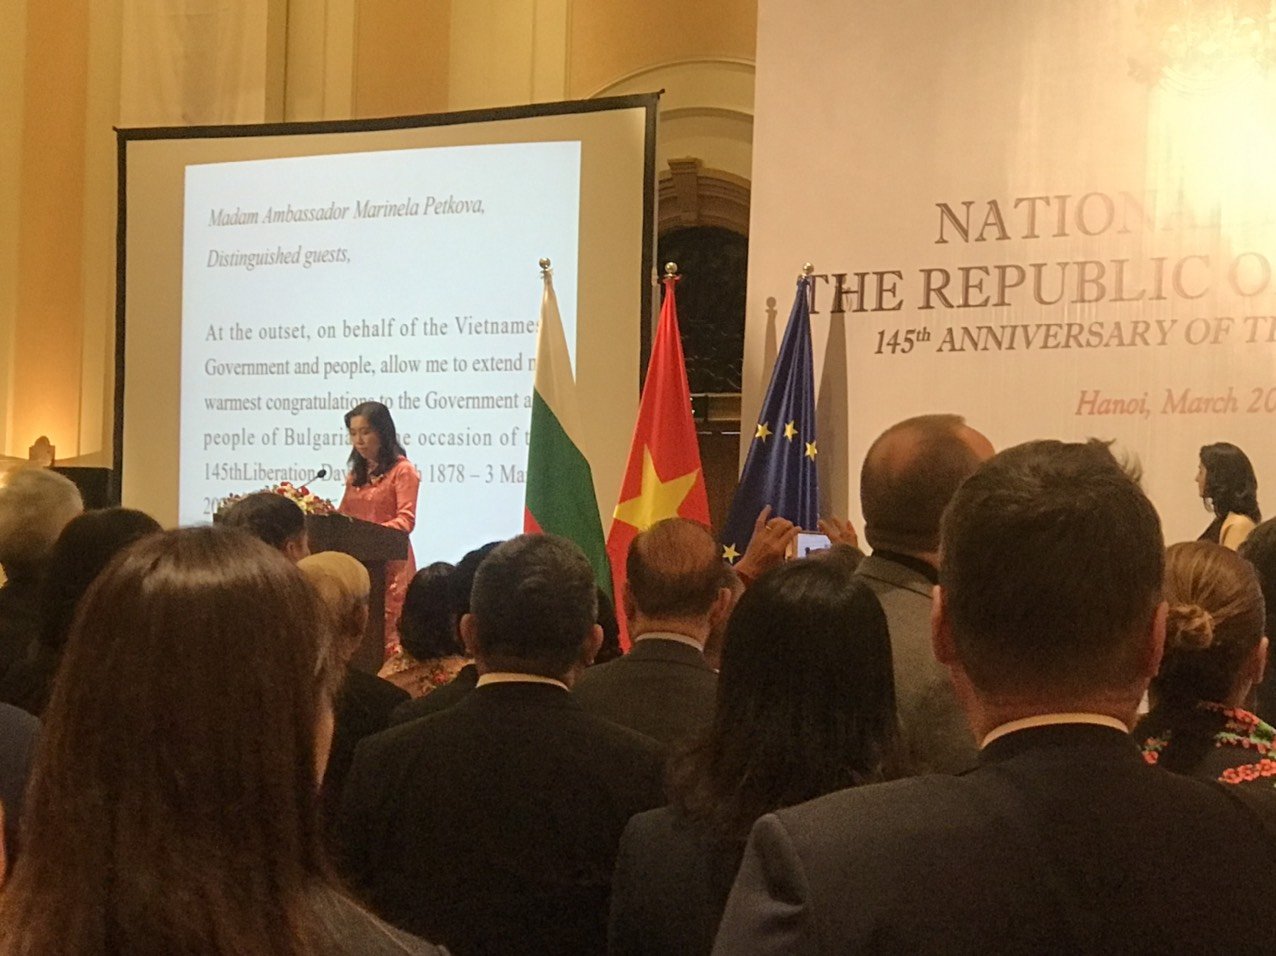 The Vietnam Institute of Research and Development for Rural Industries participated in the celebration of the National Day of the Republic of Bulgaria.